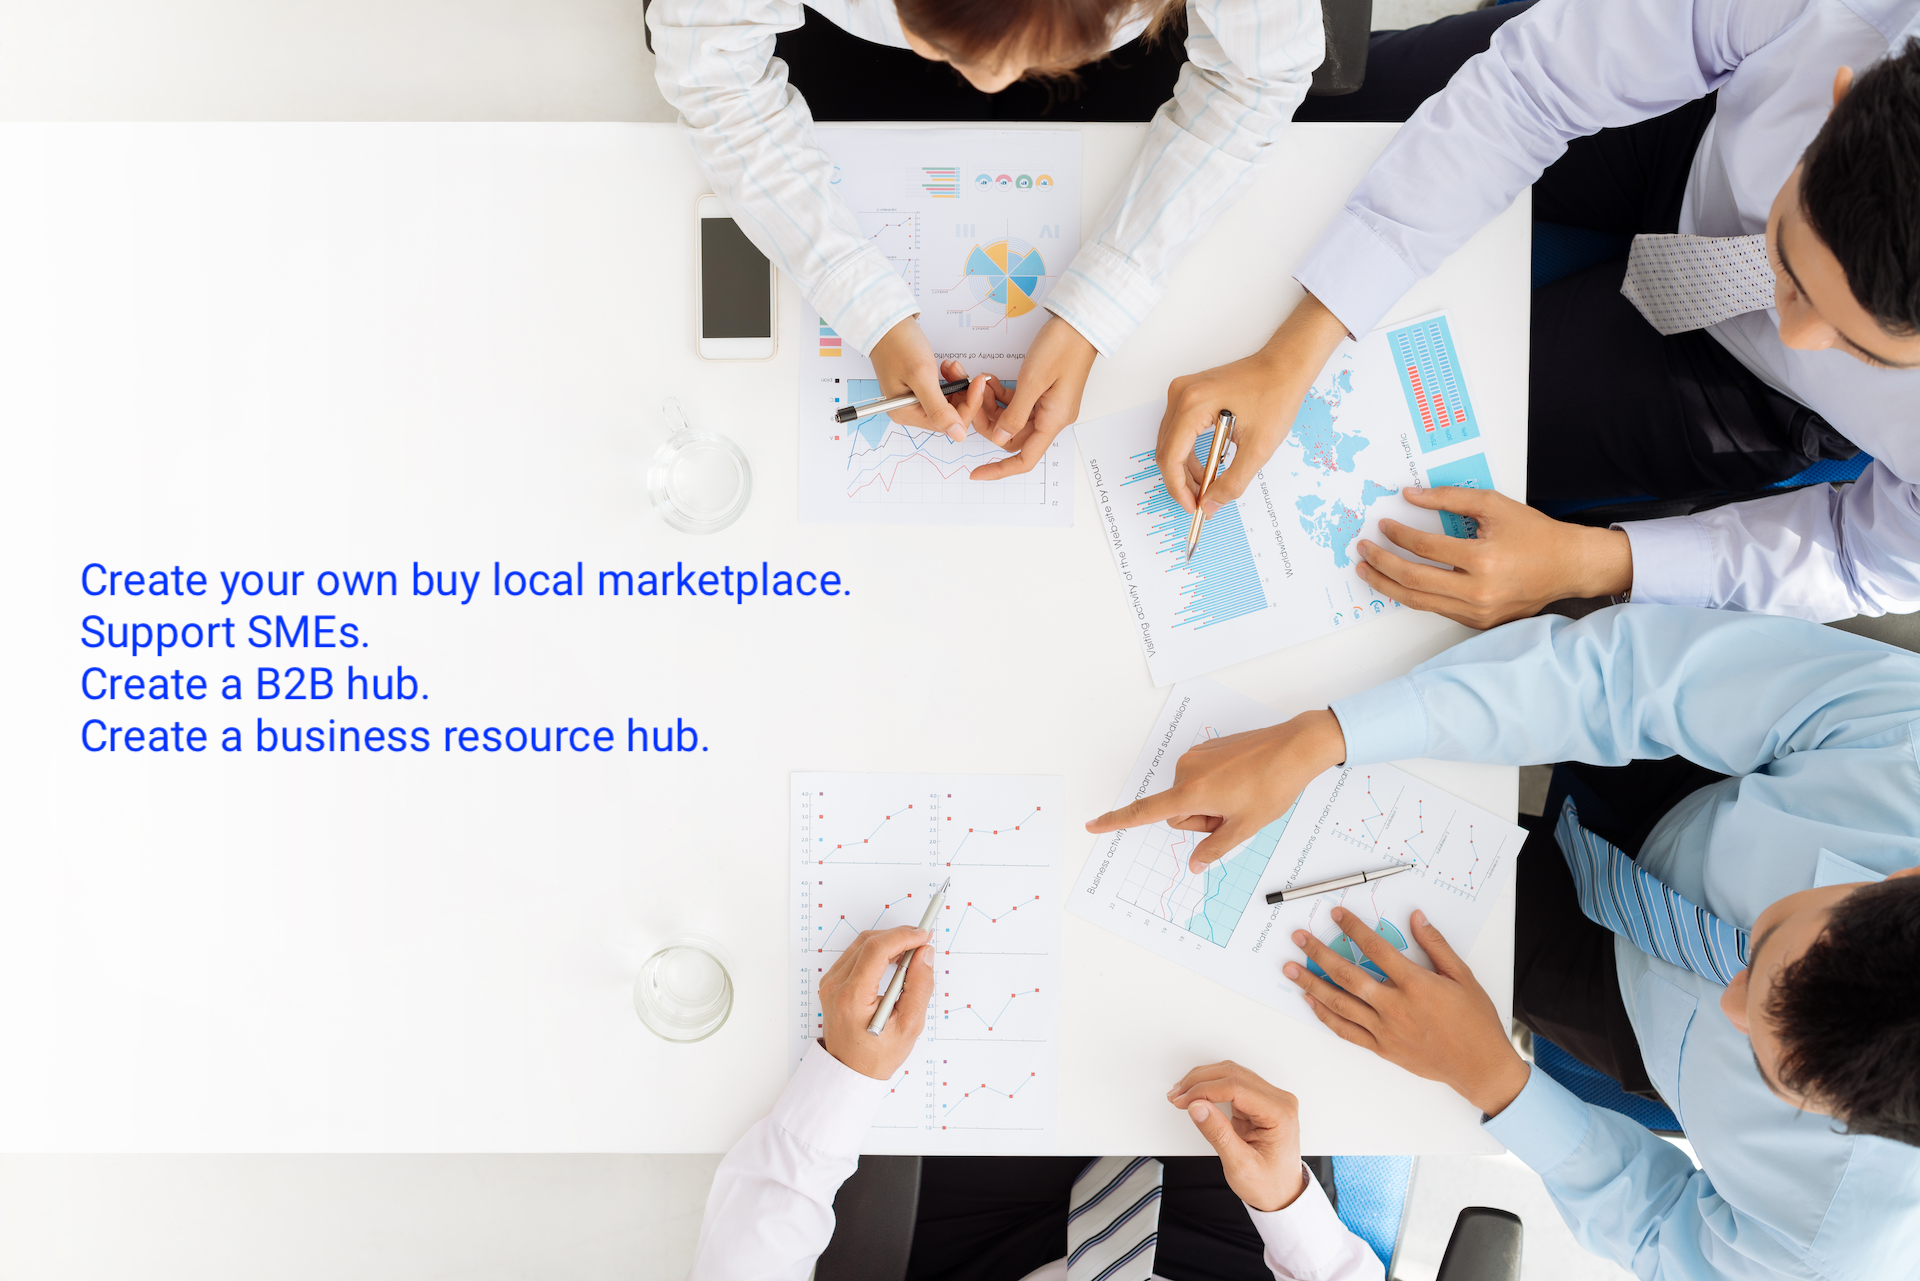 Create a buy local marketplace for your business members